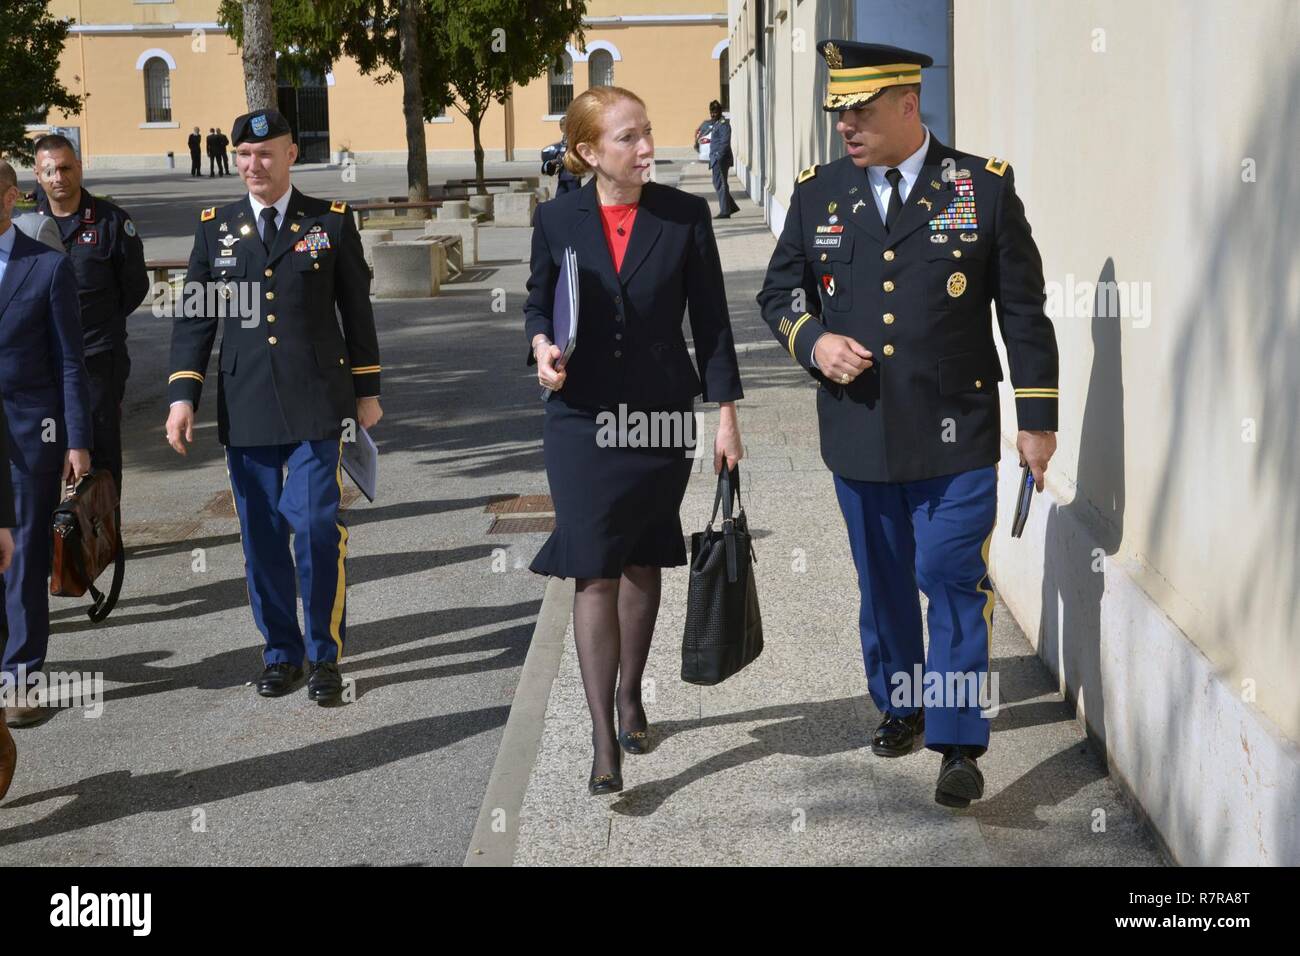 Ms. Kelly Degnan, Charge’ d’Affaires ad interim U.S. Embassy & Consulates Italy (left), and U.S. Army Col. Darius S. Gallegos, CoESPU deputy director (right), during visit at Center of Excellence for Stability Police Units (CoESPU) Vicenza, Italy, Mar. 30, 2017. Stock Photo